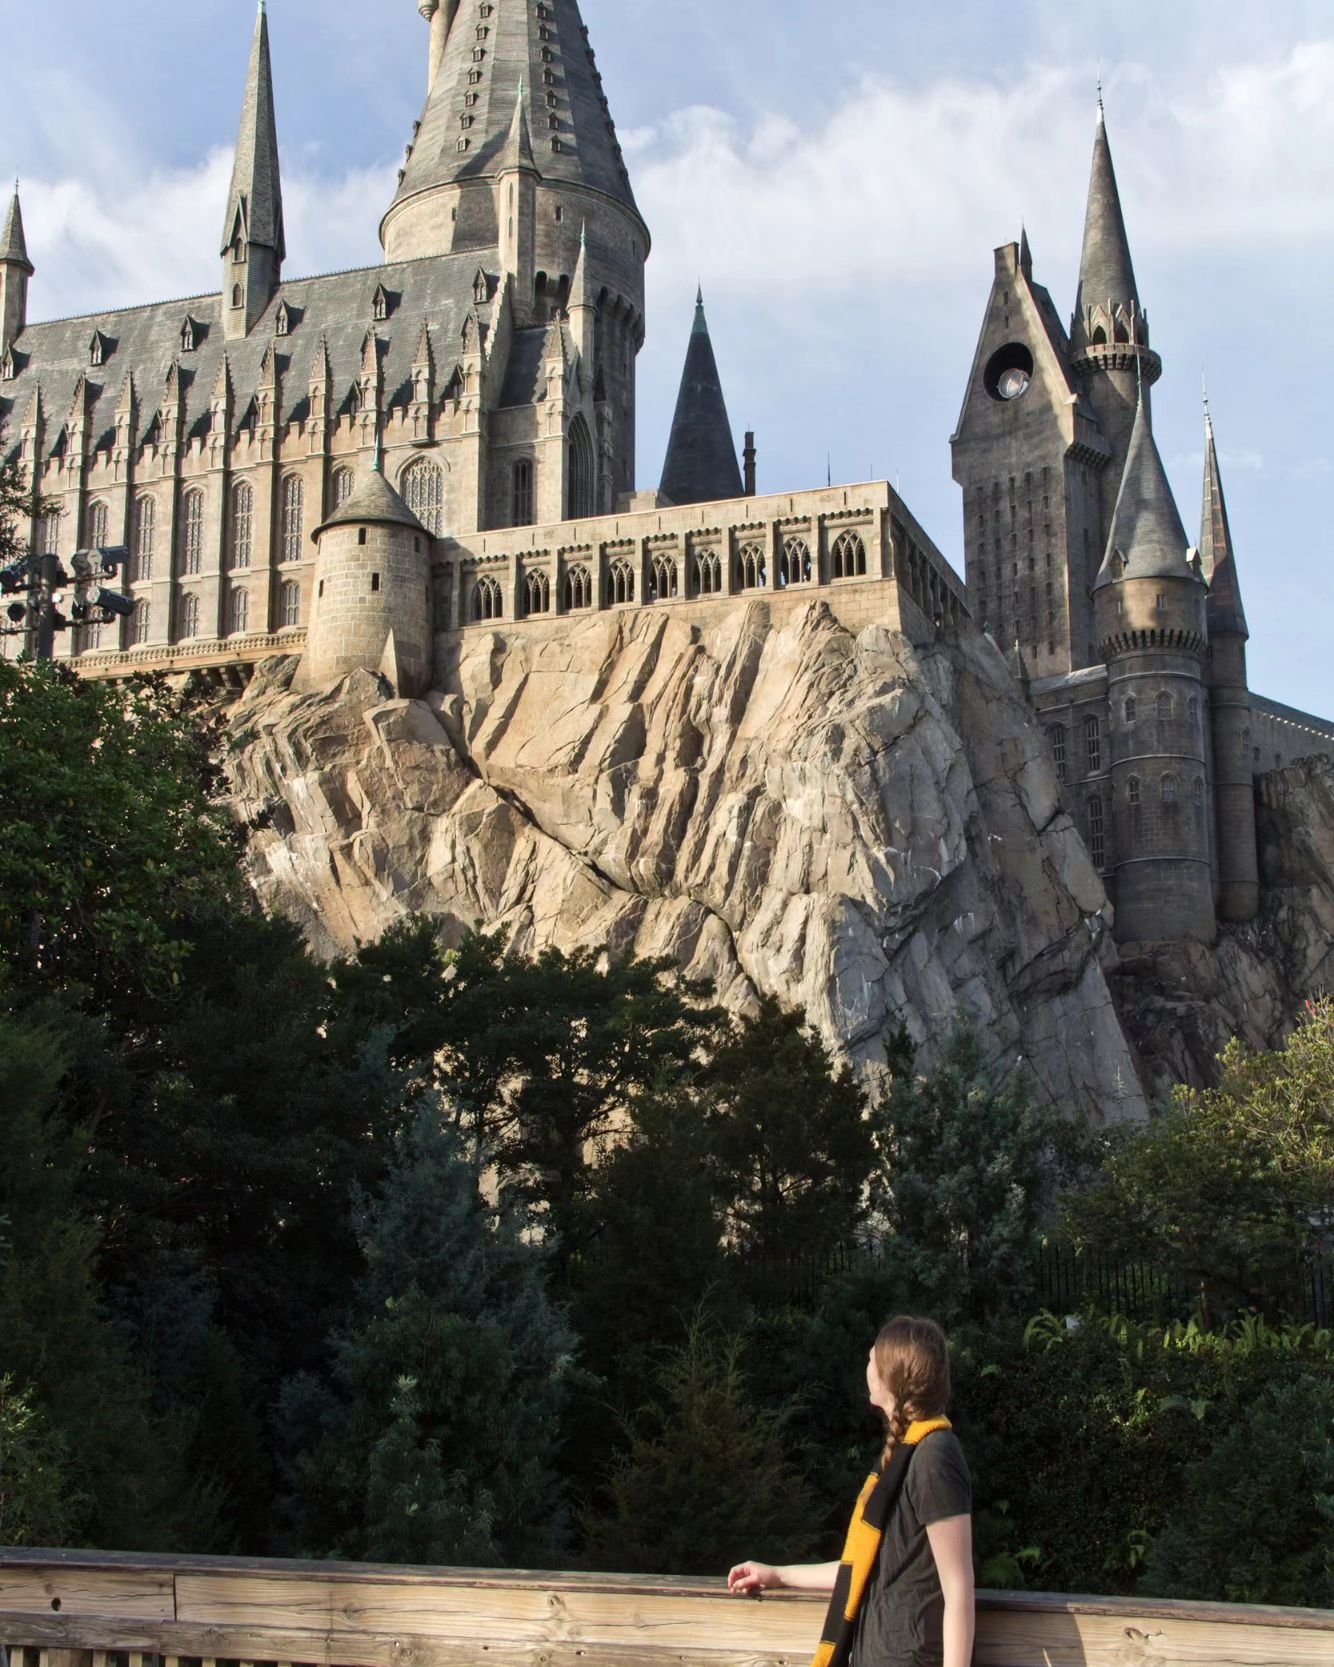 Exploring the Wizarding World of Harry Potter!

Click the link in my bio to learn more, and see how the Universal park compares to the studio tour in London!

#universal #wizardingworldofharrypotter #wizardingworld #harrypotter #harrypotterorlando #h